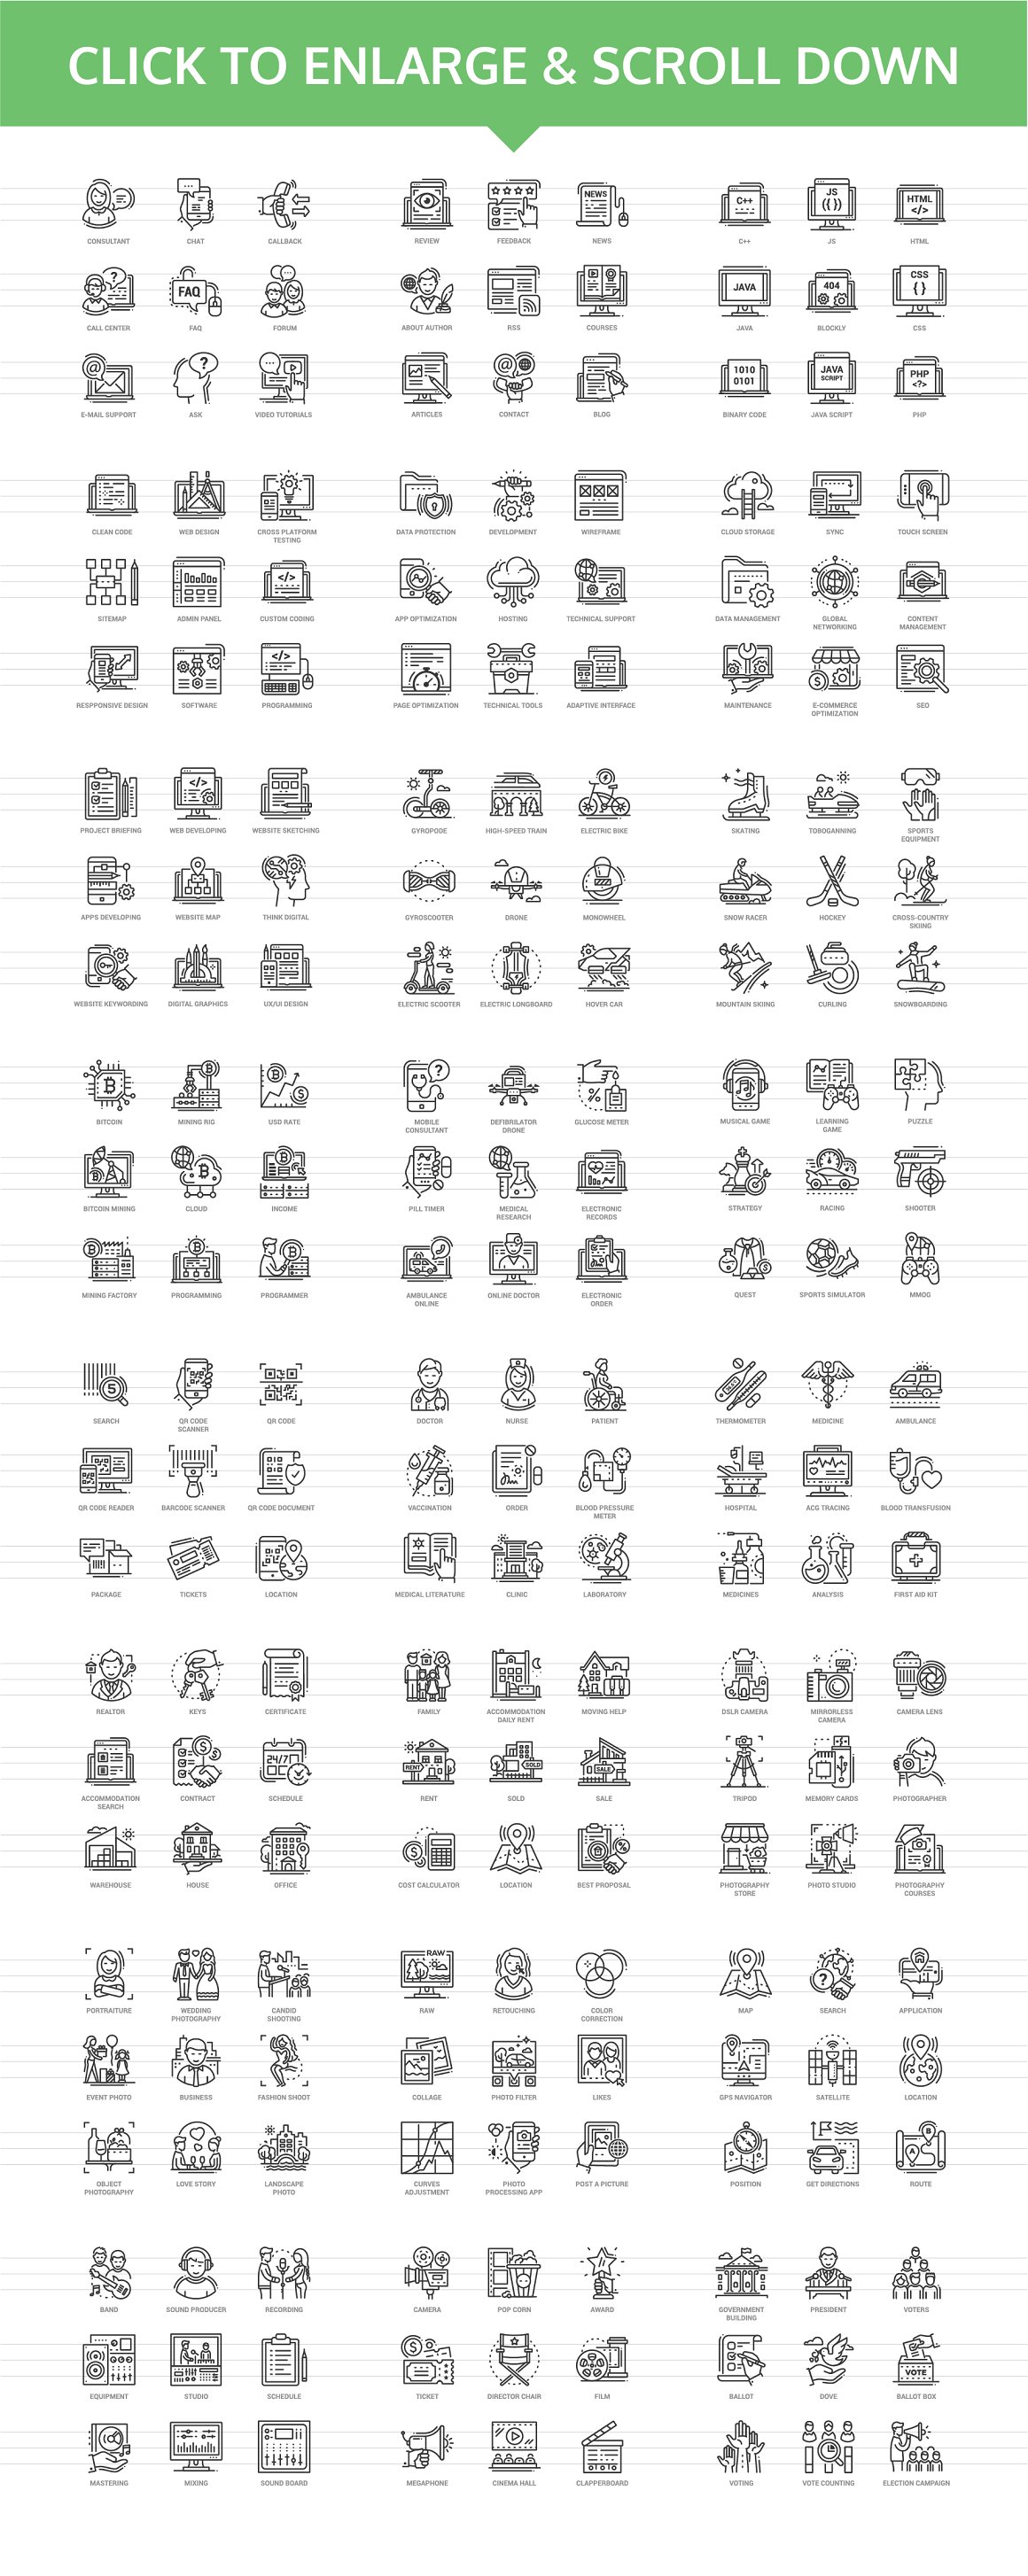 Clipart of different black innovicons icons on a white background.